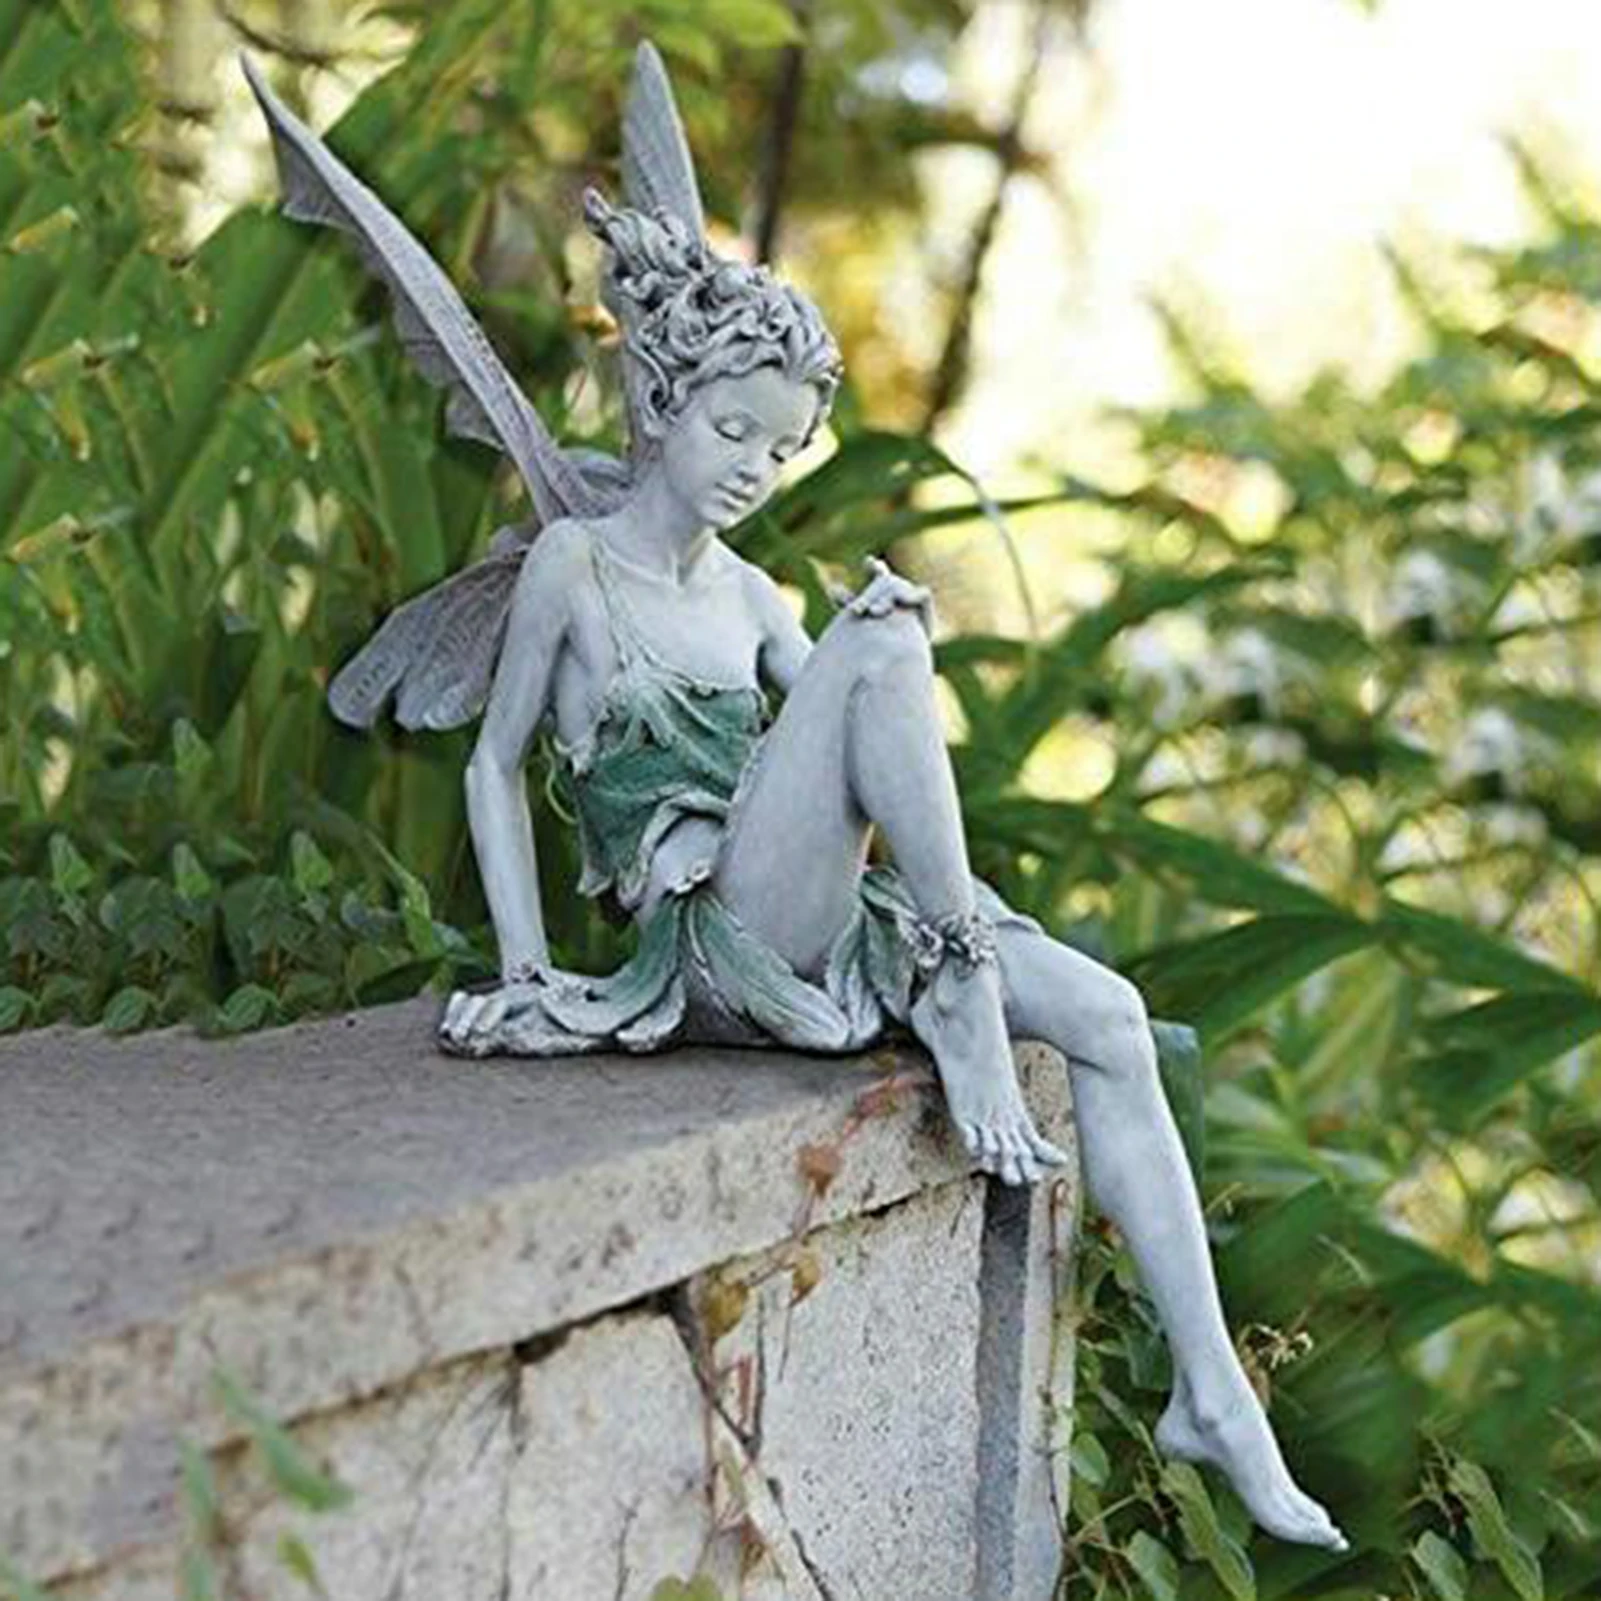 

Fairy Angel Sitting Garden Statue Ornament Decoration Resin Crafts Decor Accessories Home Landscaping Backyard Lawn Decoration